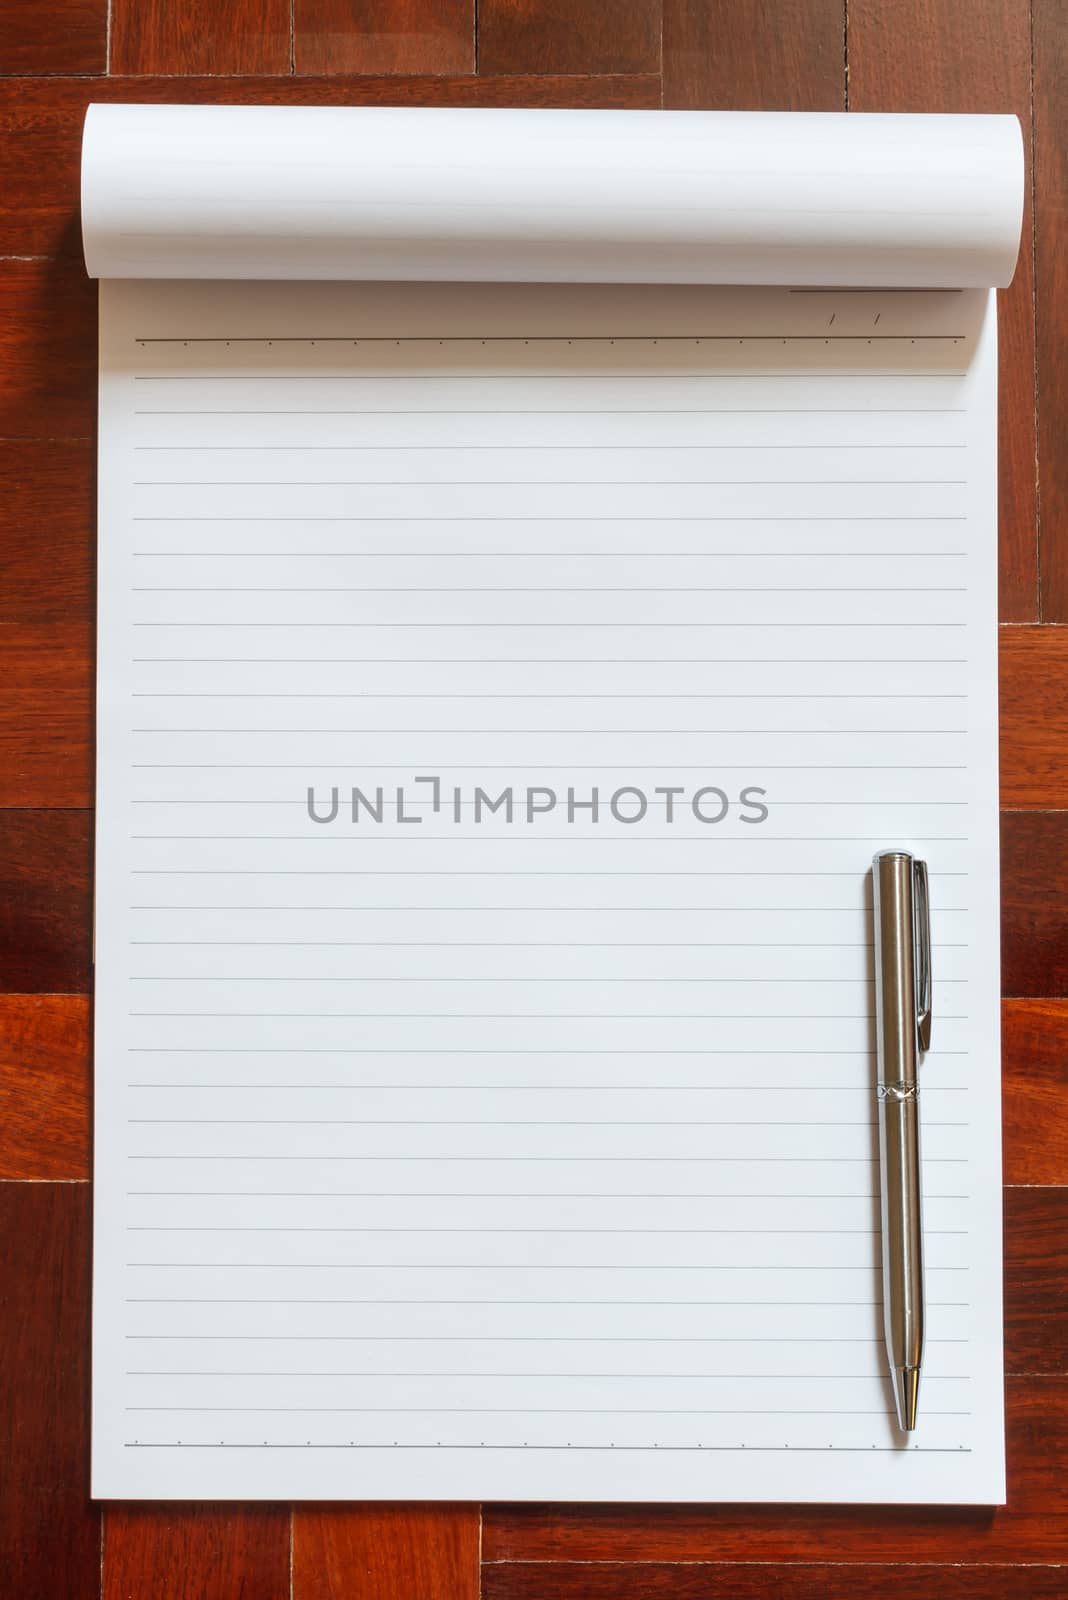 Notebook blank white page and pen. Wooden floor in the background.